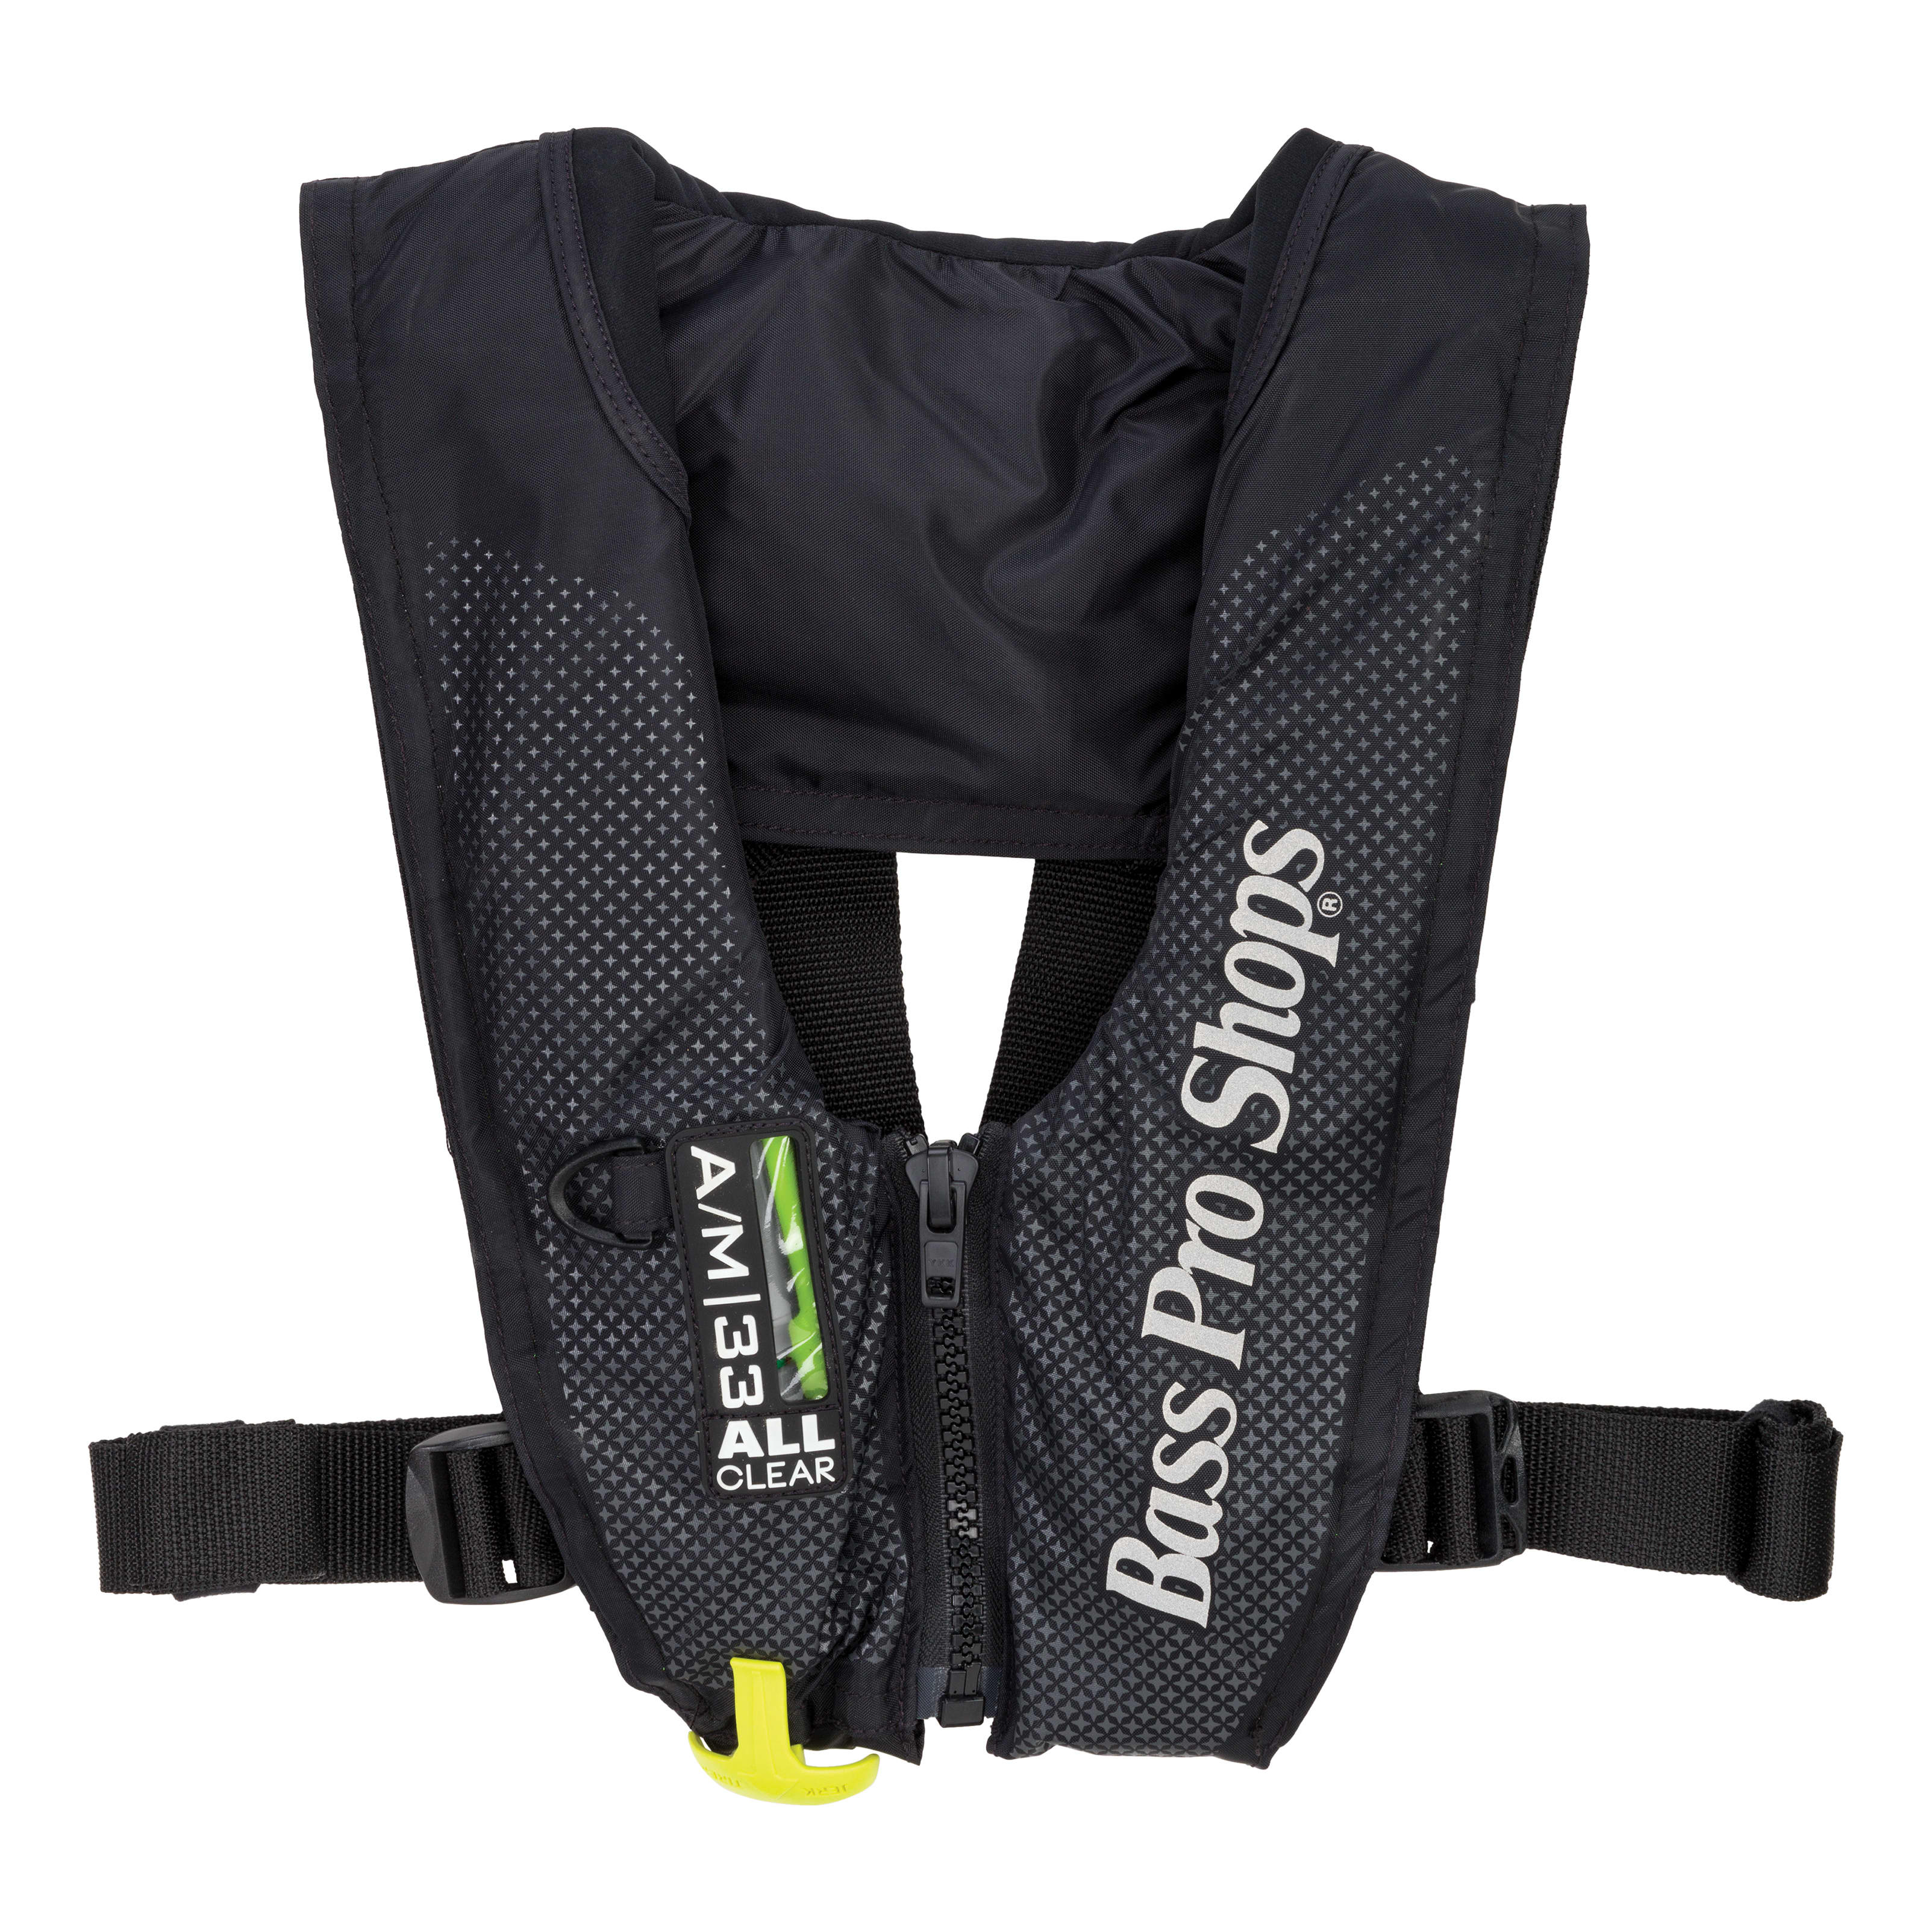 Bass Pro Shops® AM 33 All-Clear™ Auto/Manual-Inflatable Life Vest - Black